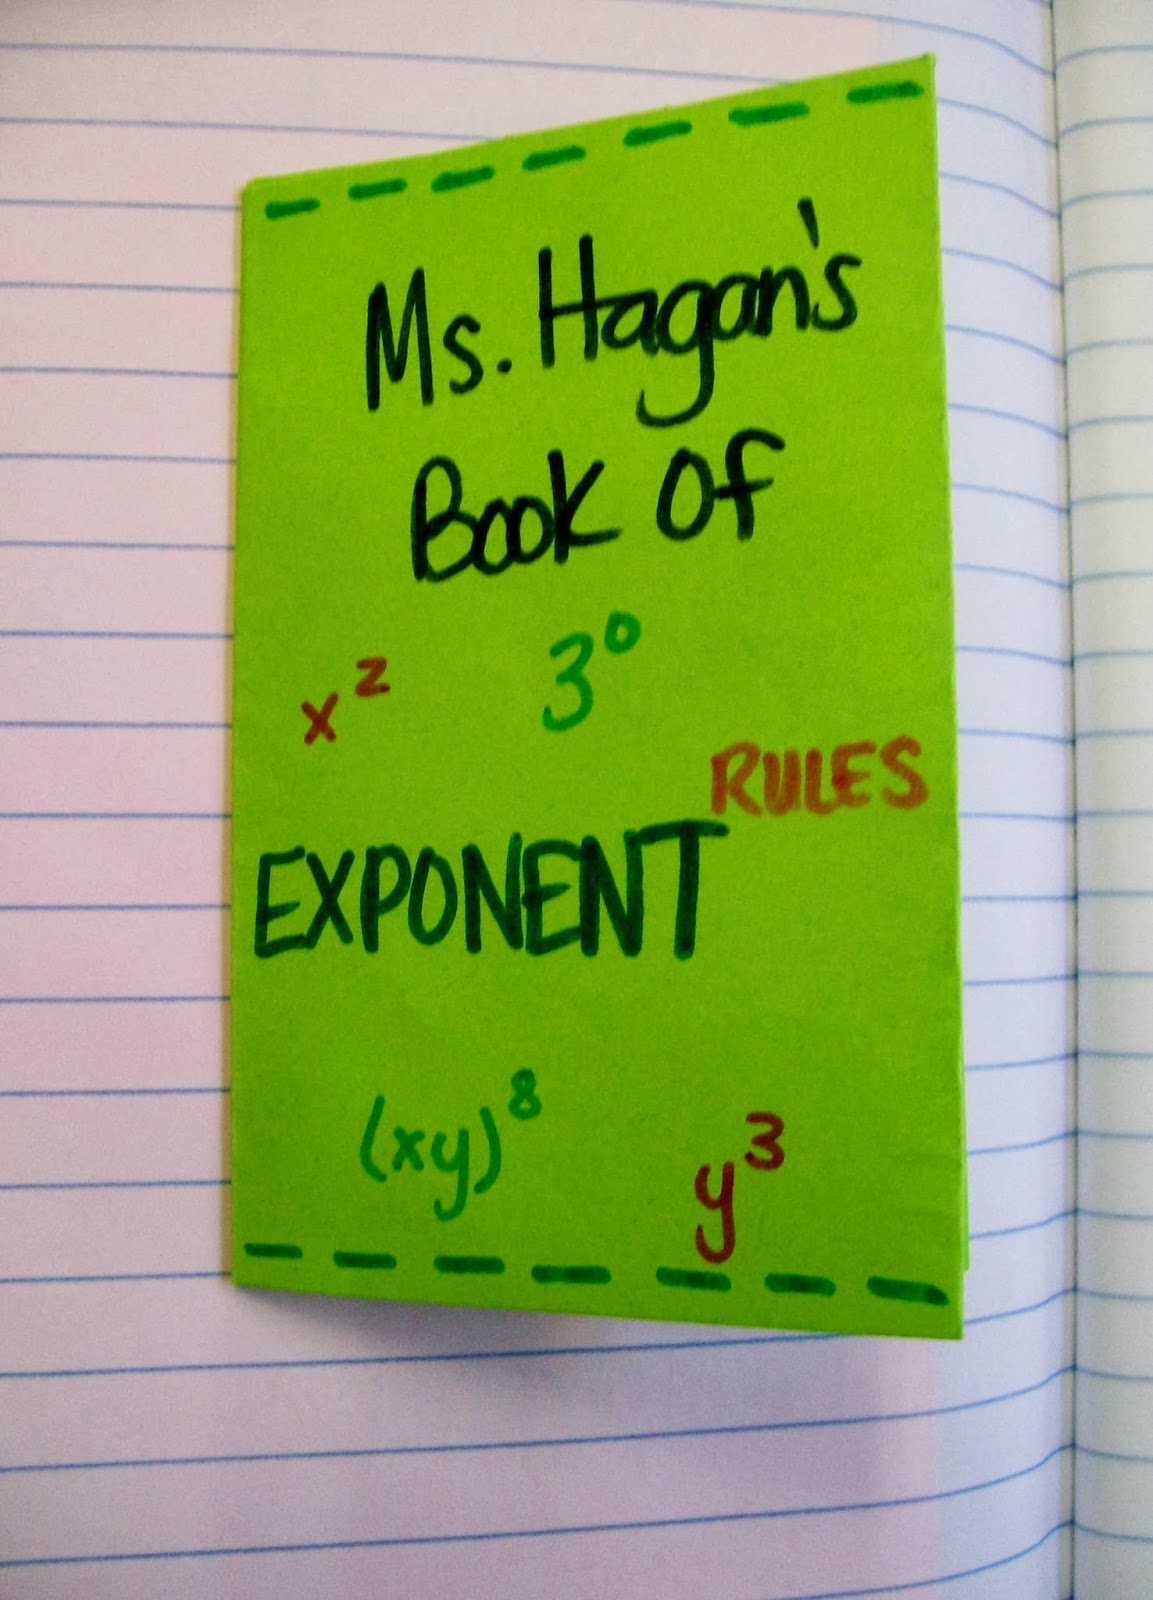 green foldable book with title "Ms. hagan's book of exponent rules." 